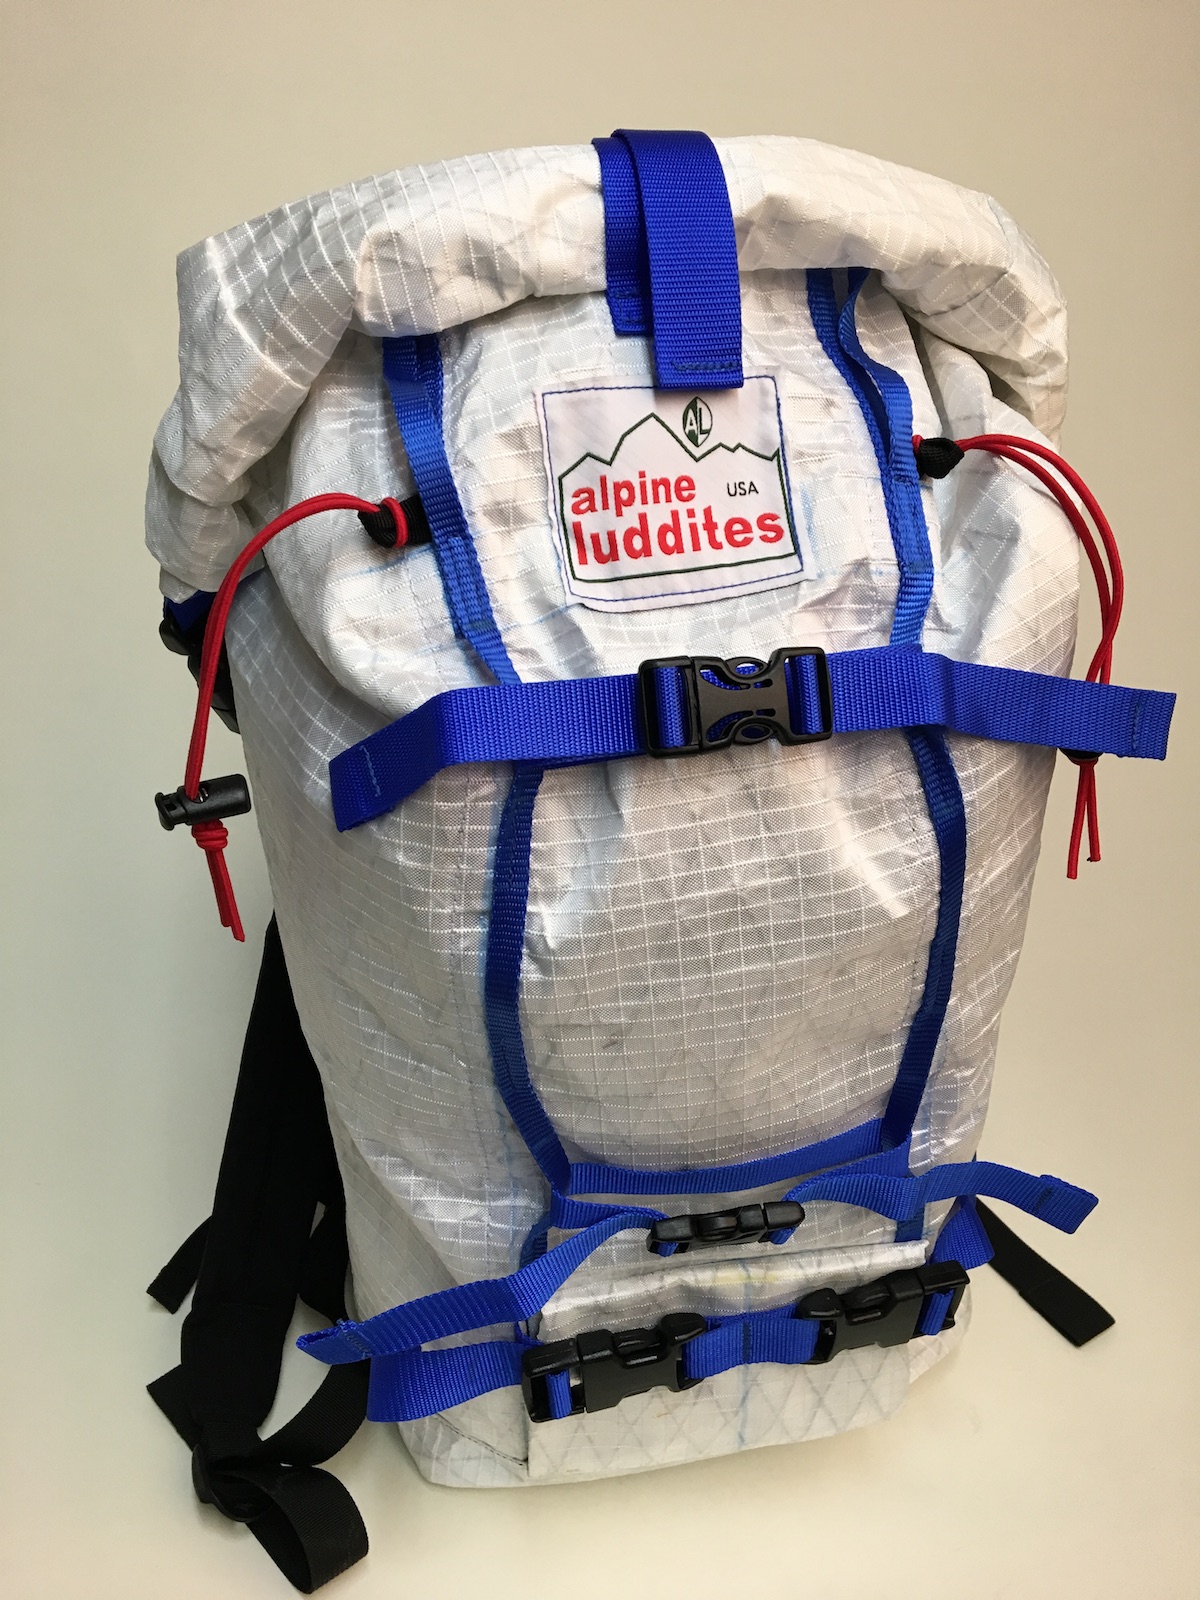 Here the pack's roll-top closure is sealed and strapped down tight. [Photo] Paula Wright